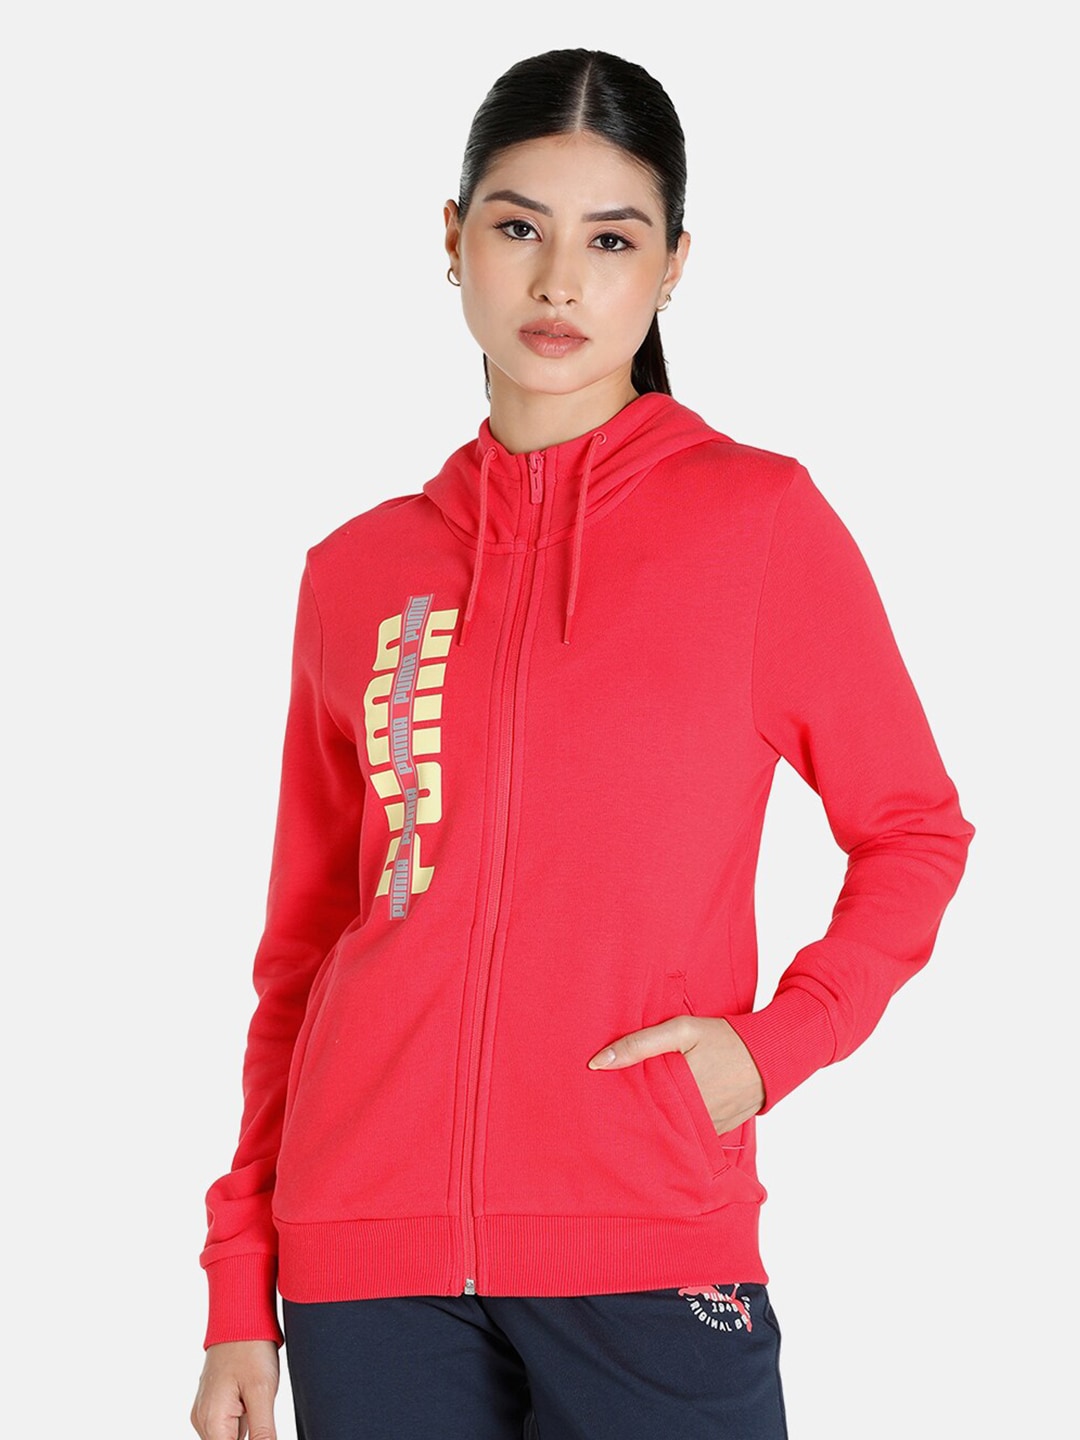 Puma Women Pink Graphic Hoodie Price in India